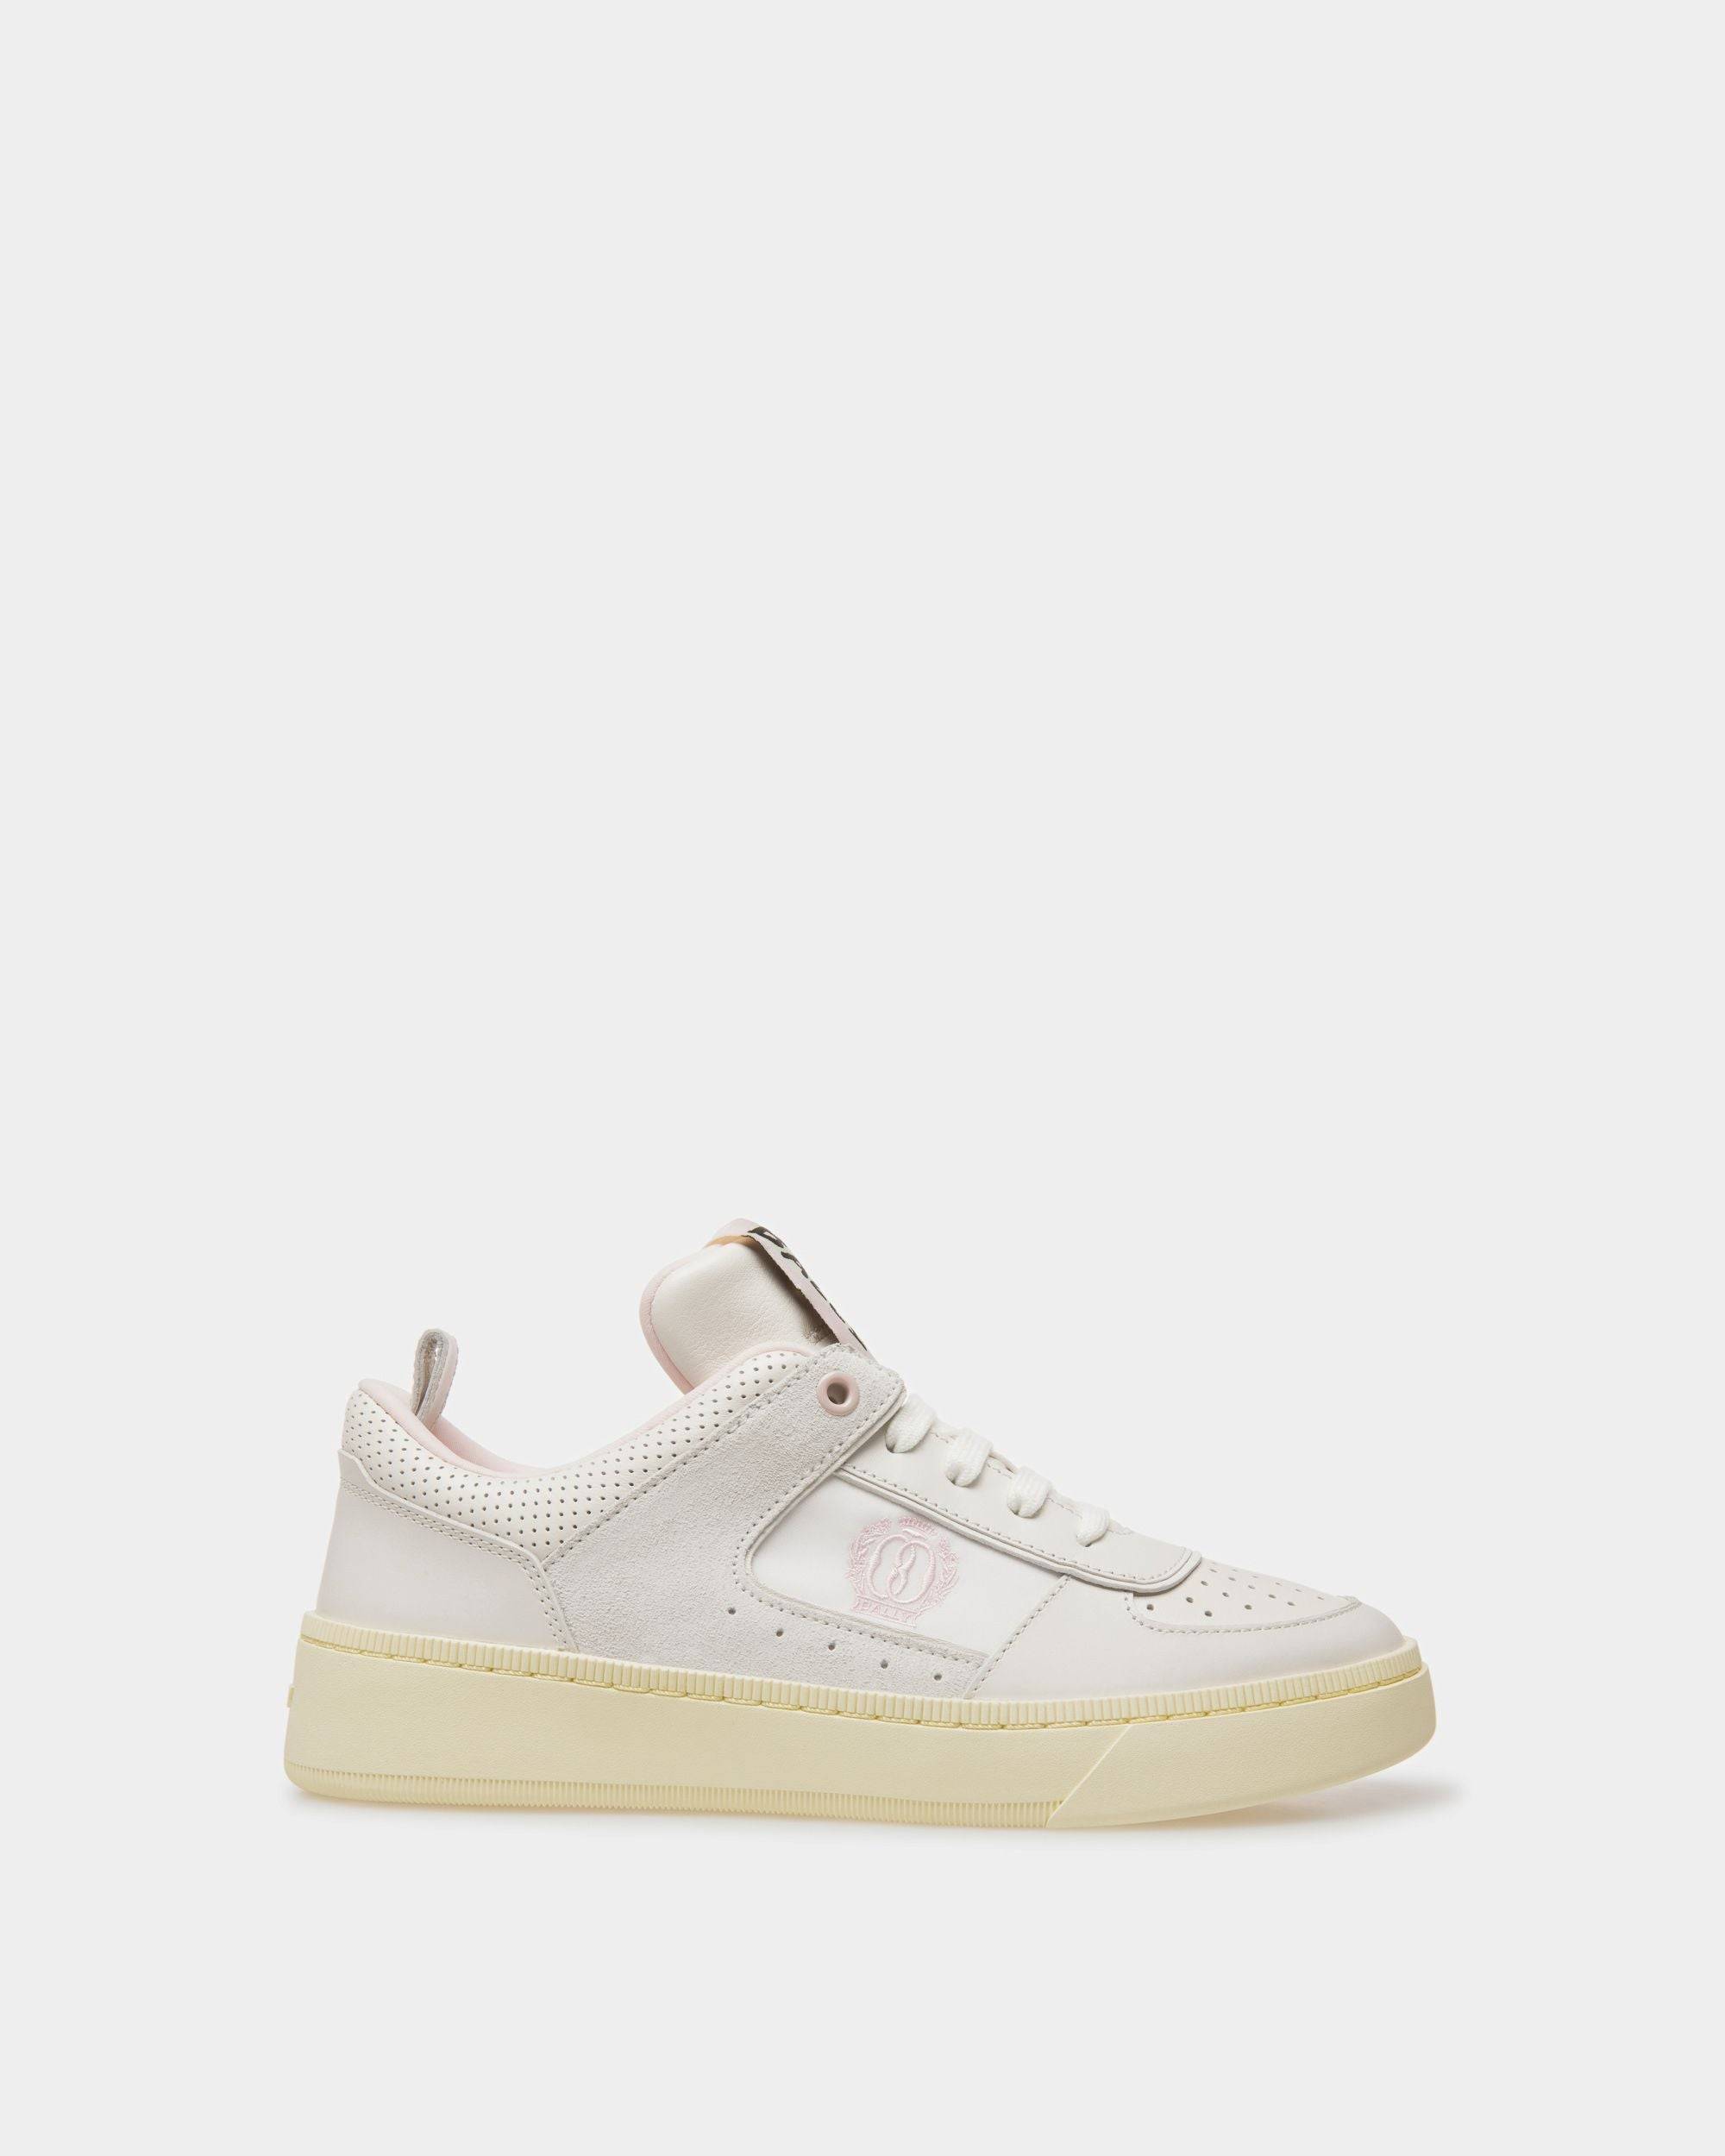 Women's Raise Sneakers In White And Pink Leather | Bally | Still Life Side